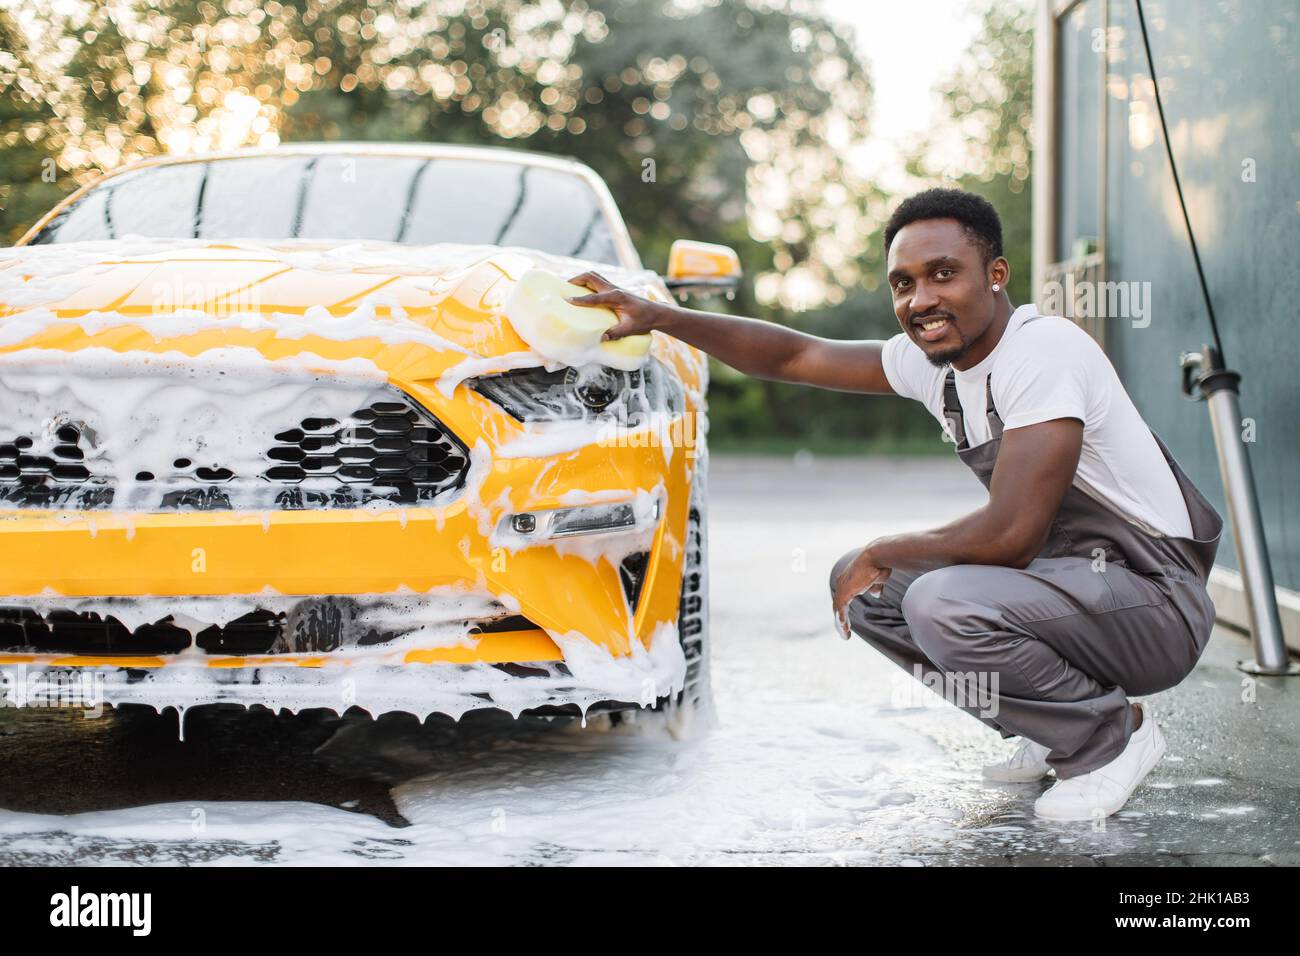 slids udskiftelig Whitney Car detailing wash at outdoors car wash service. Handsome African American  man in white t-shirt and overalls washing car radiator grille and hood of  his new yellow sport car with foam and